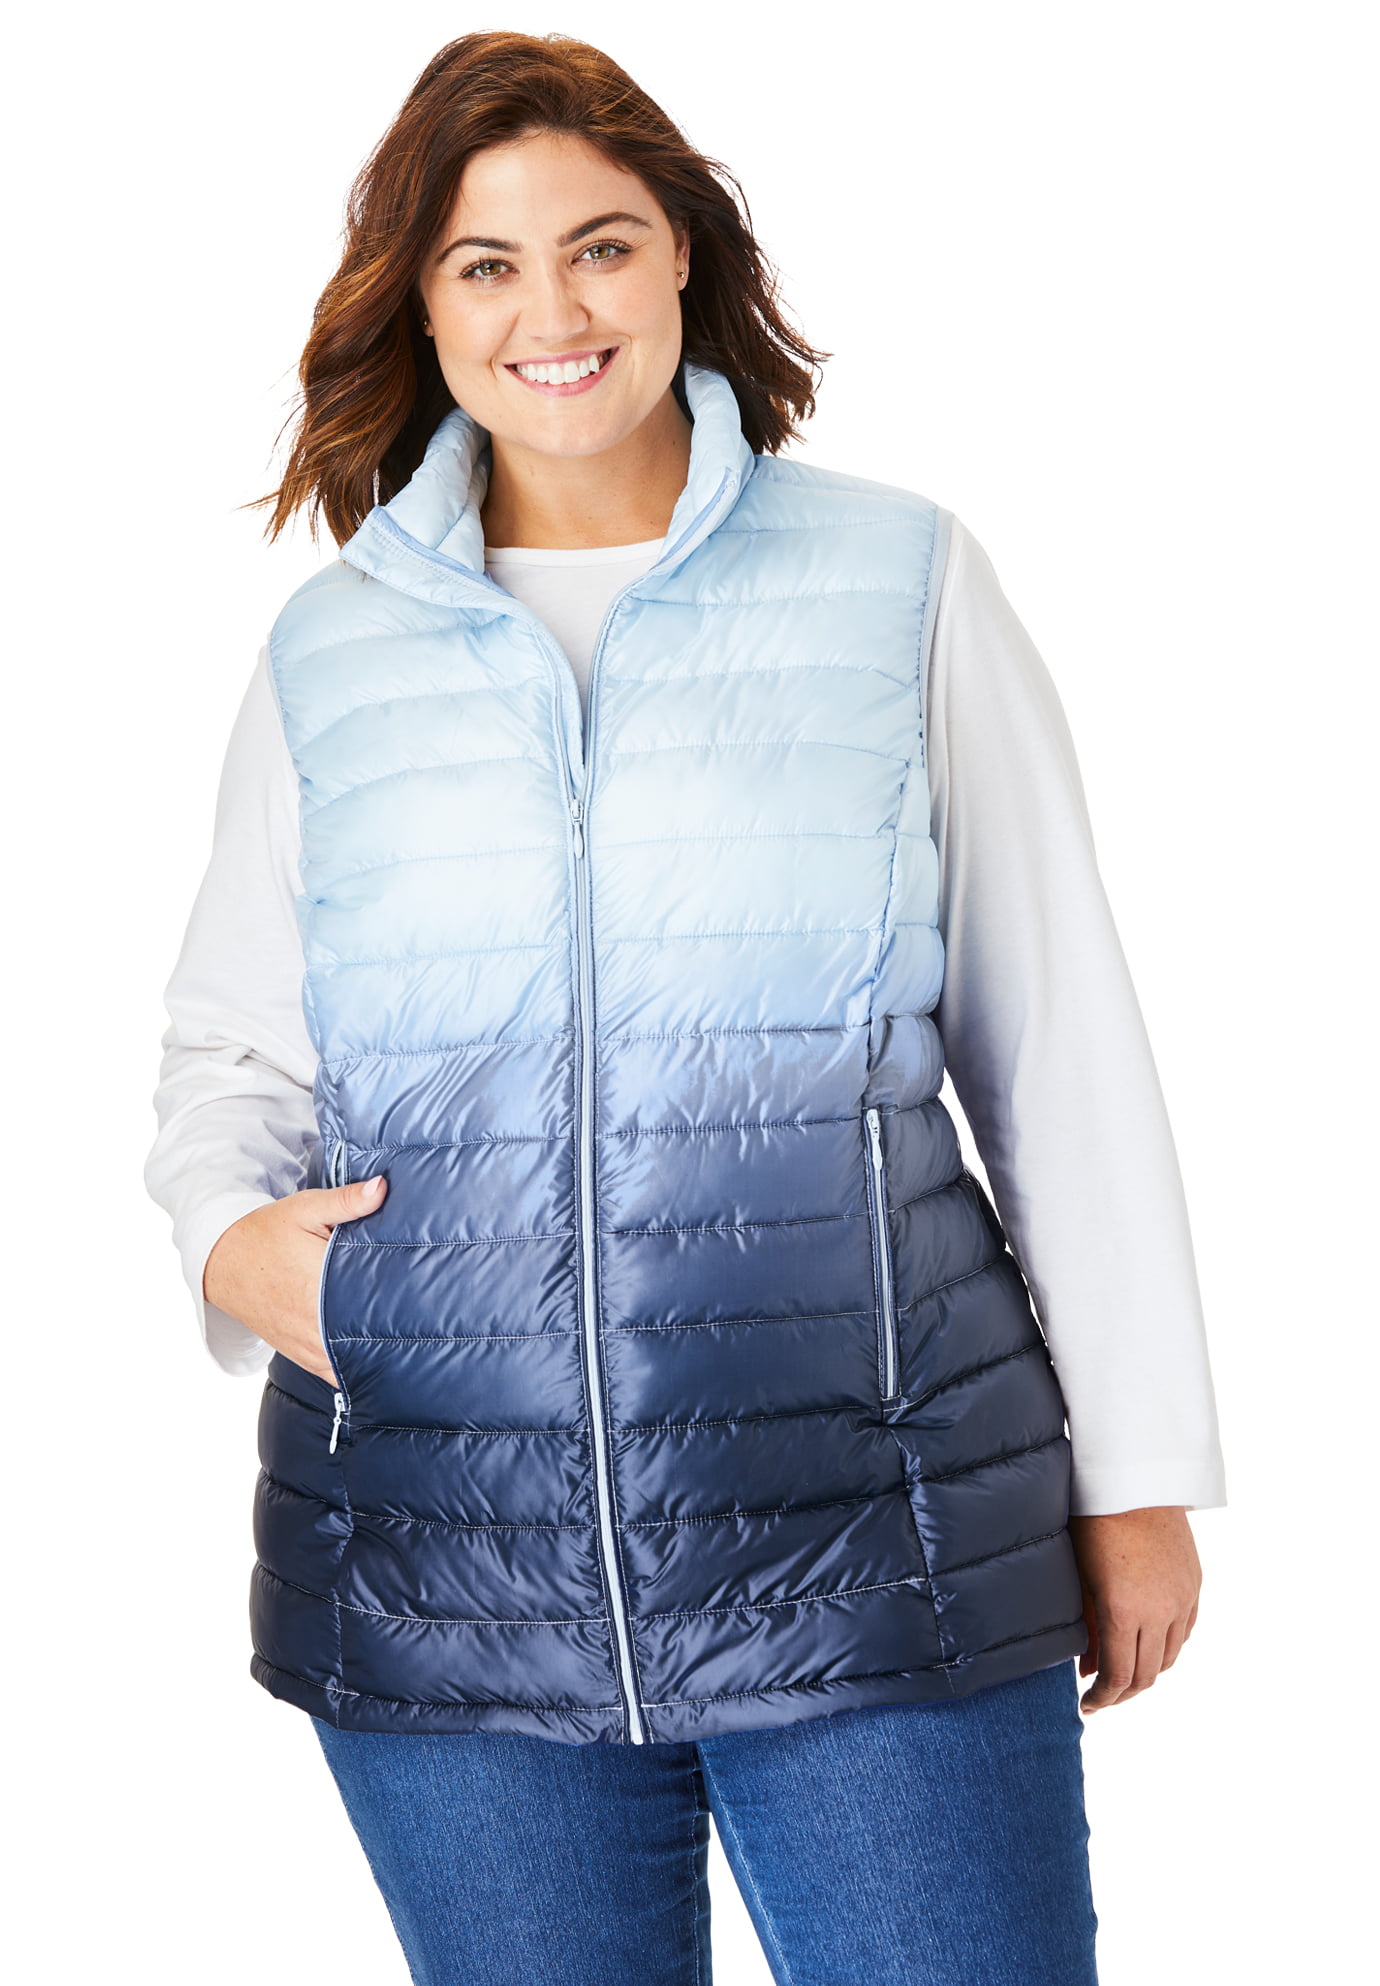 Woman Within - Woman Within Plus Size Packable Puffer Vest - Walmart